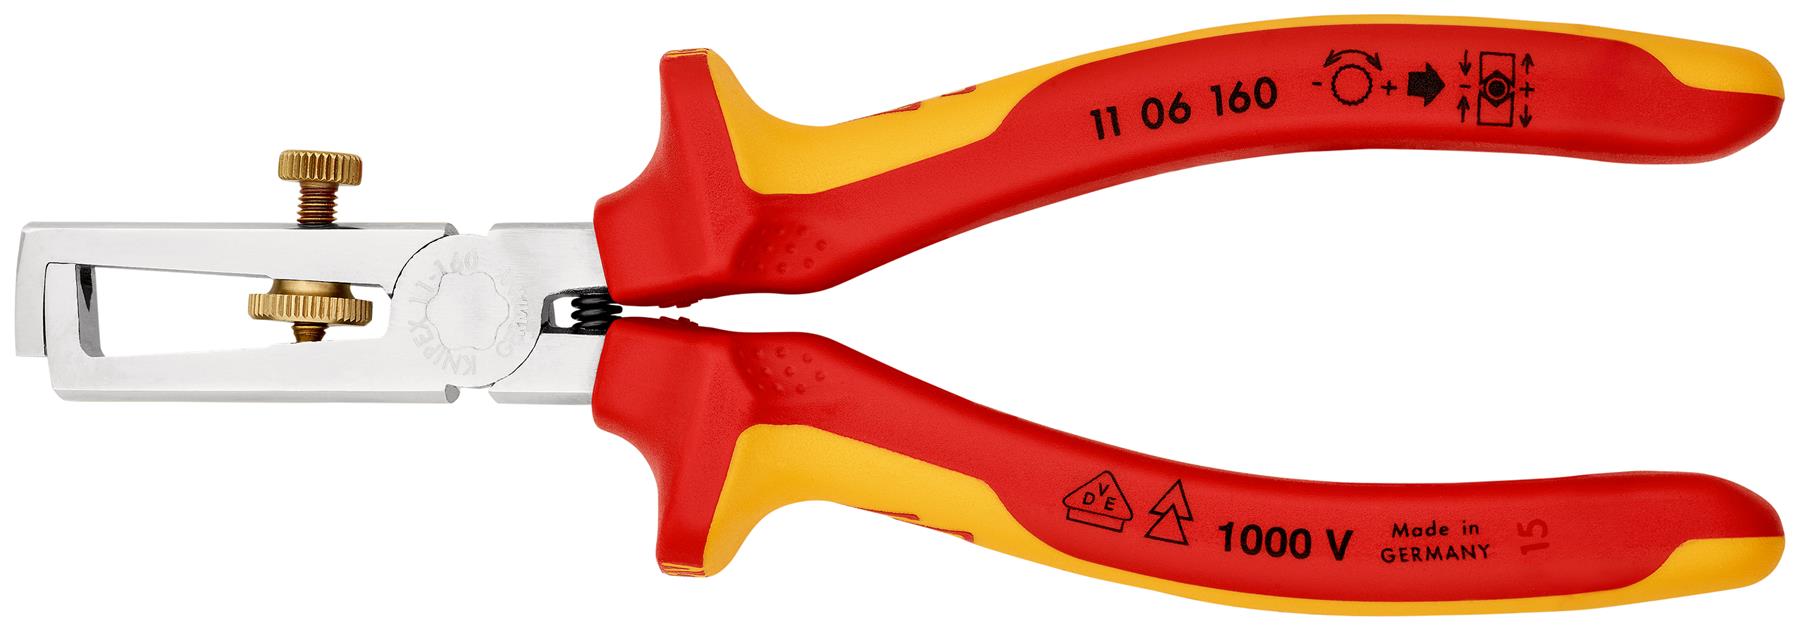 Knipex Insulation Wire Stripper with Opening Spring 160mm VDE Insulated 1000V 11 06 160